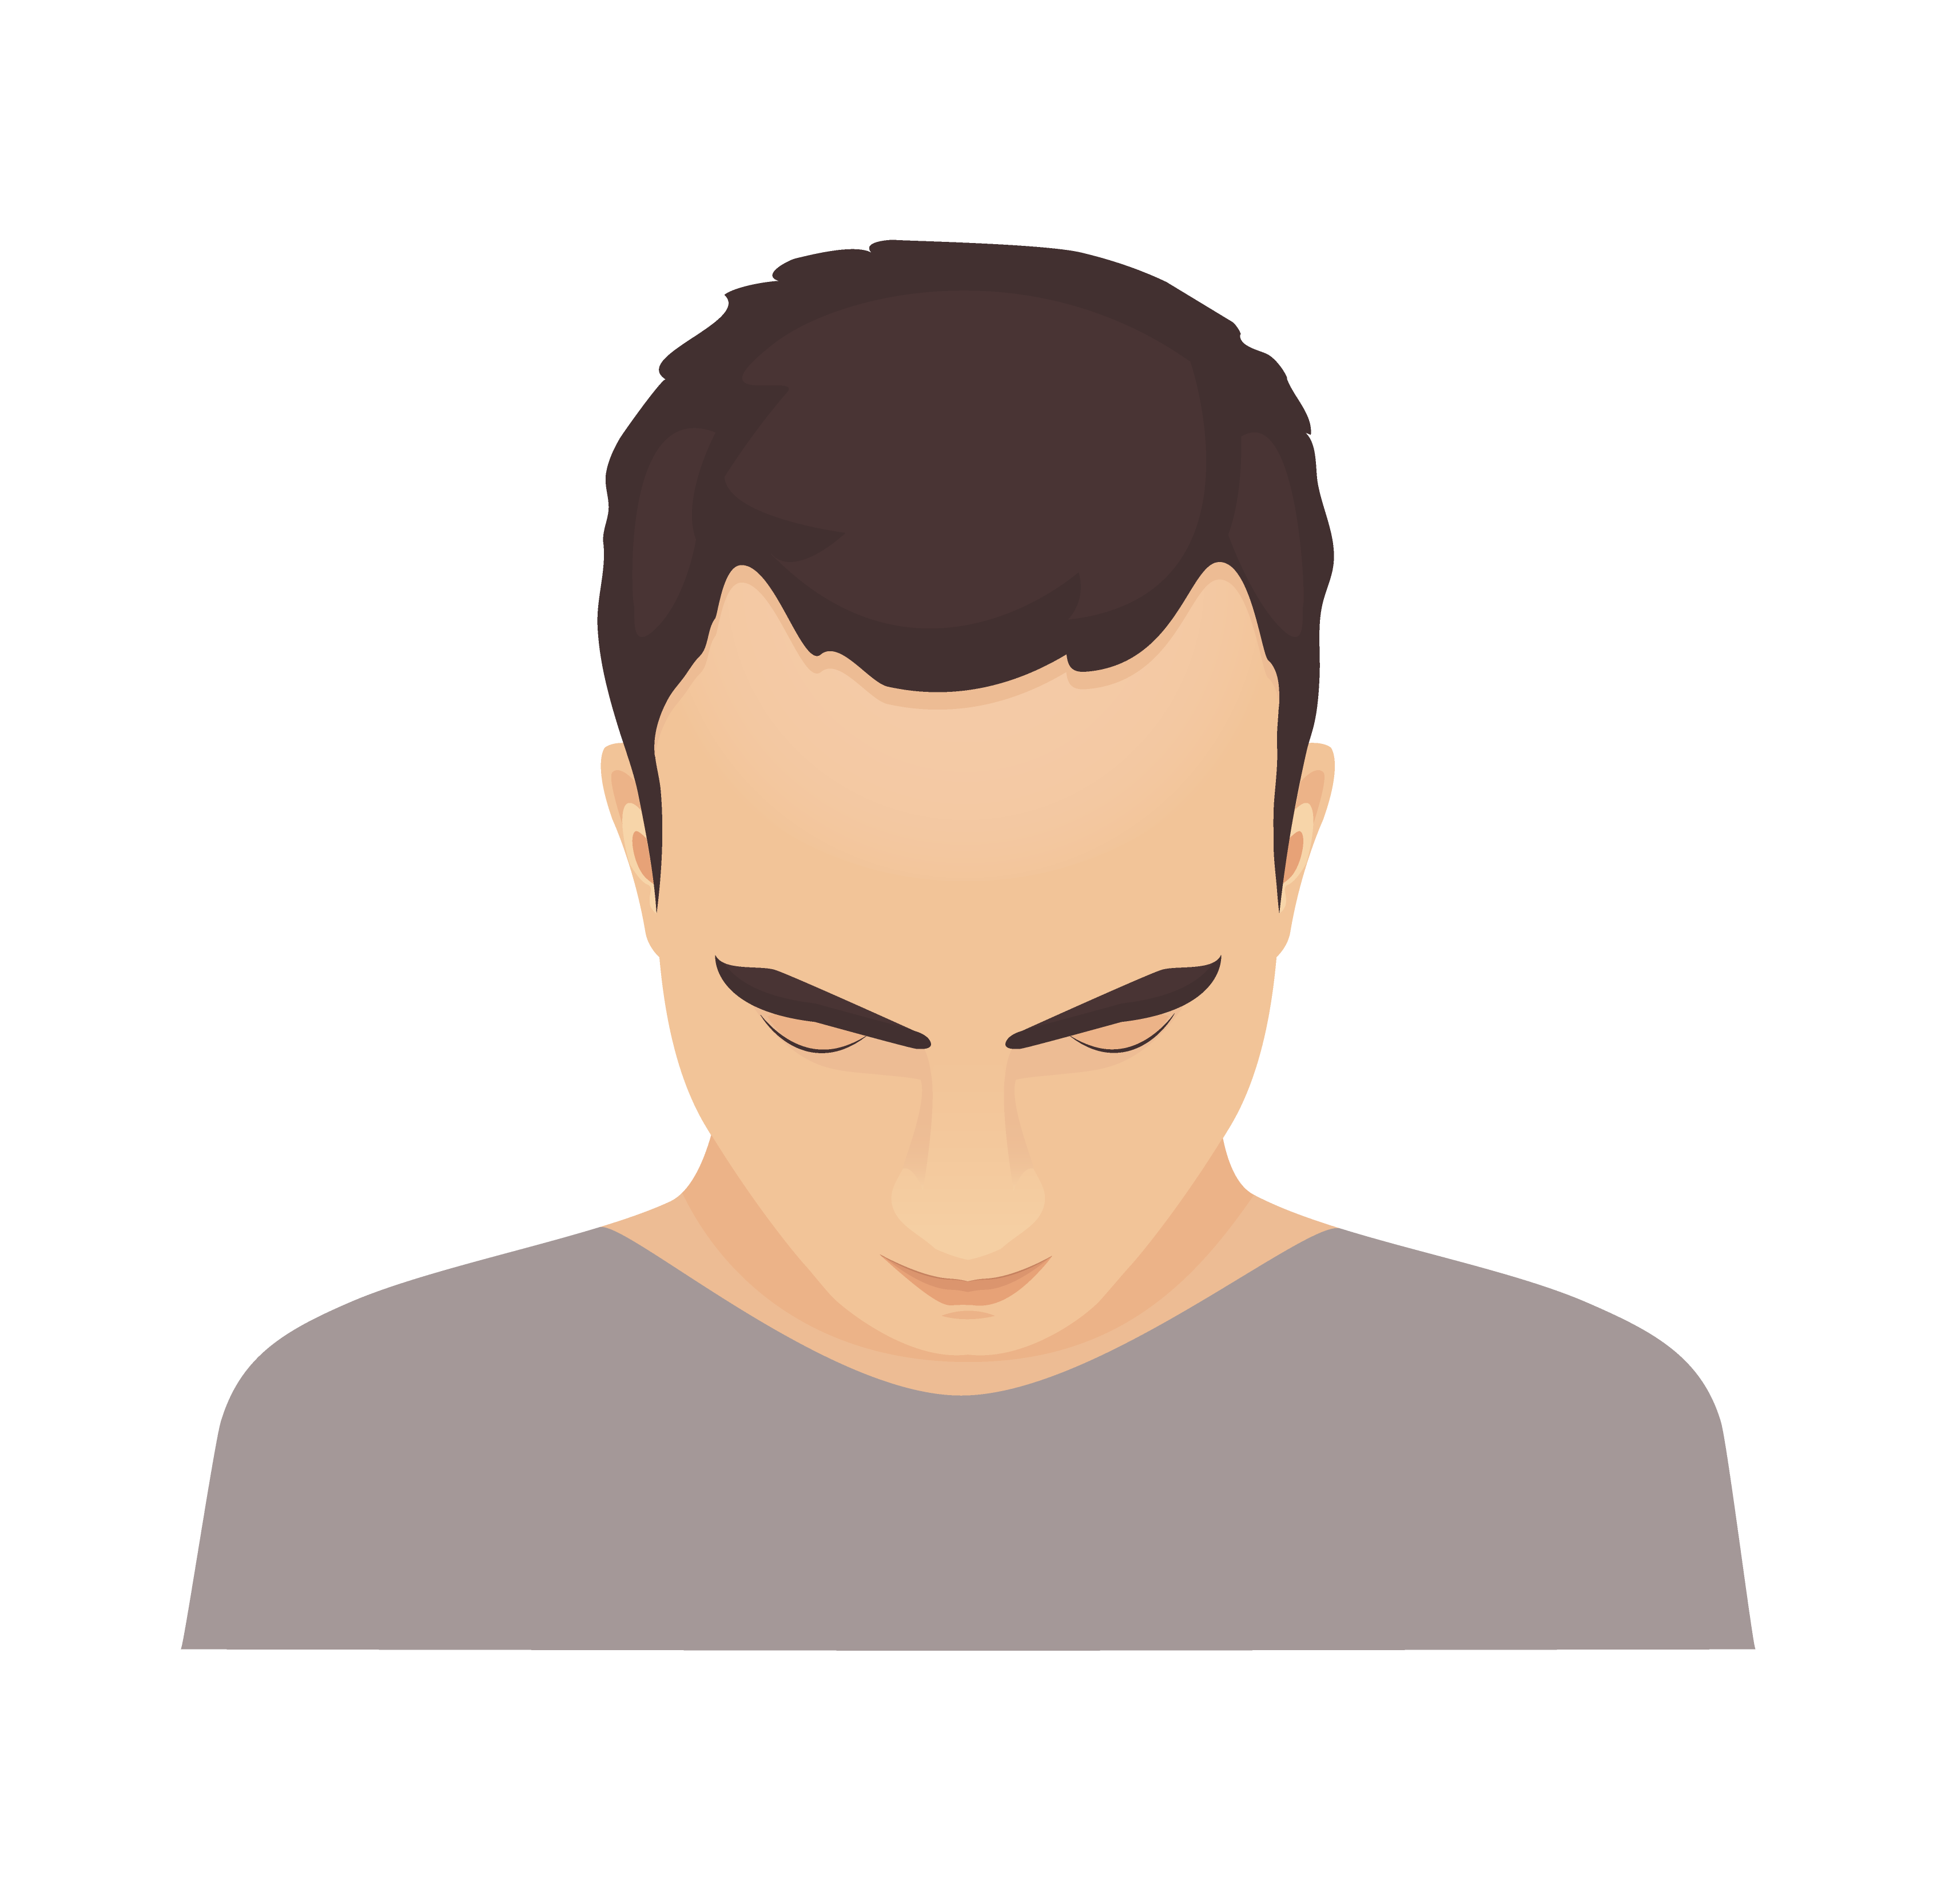 Hair Loss Solution: Phases in Male Pattern Baldness